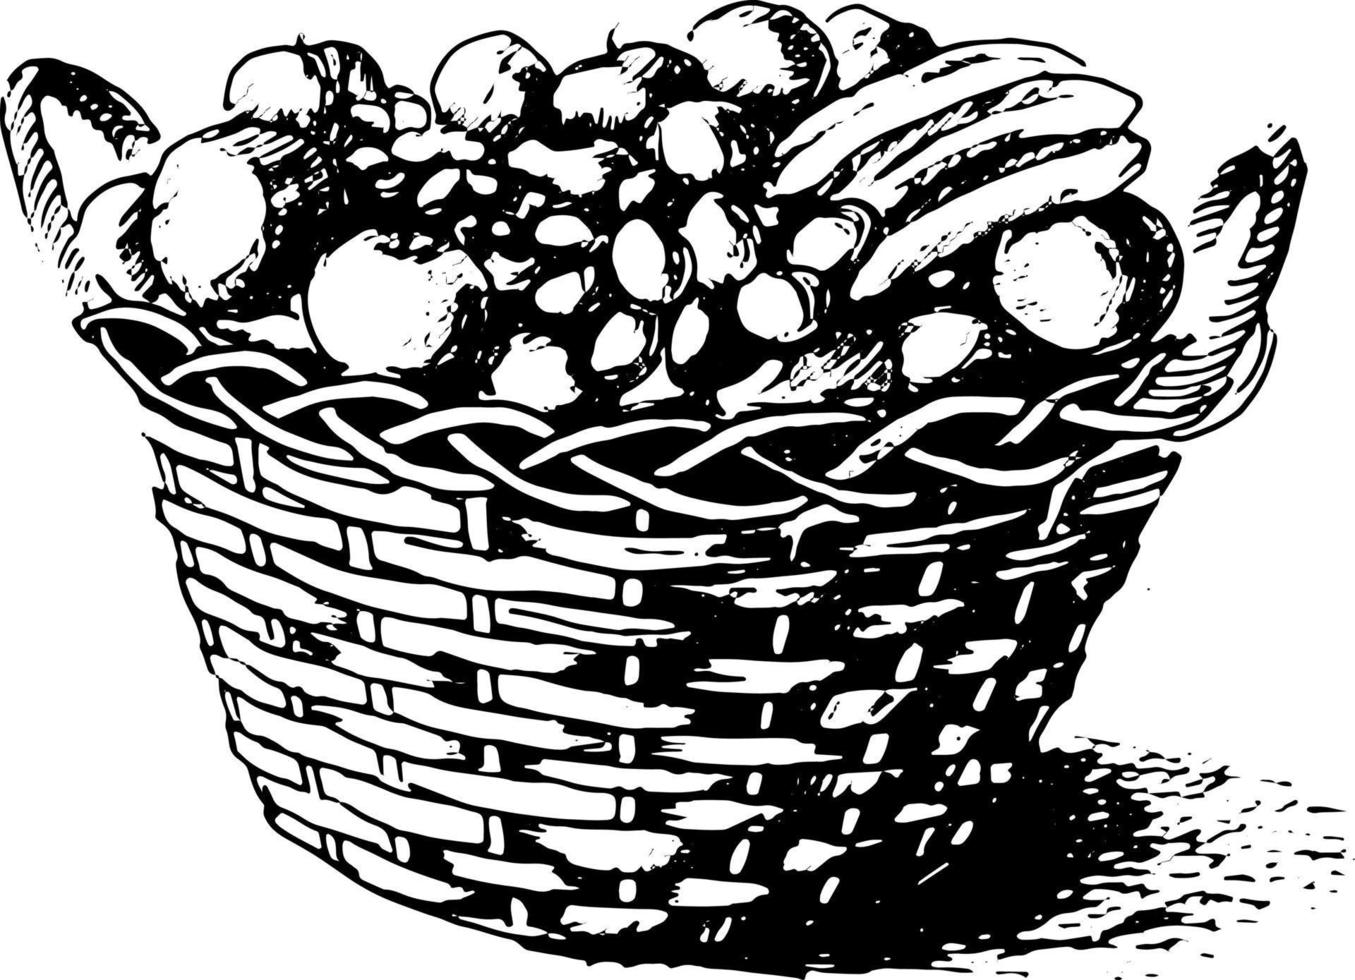 Hand-drawn style vector illustration. Black and white graphic icon. Basket with fruits